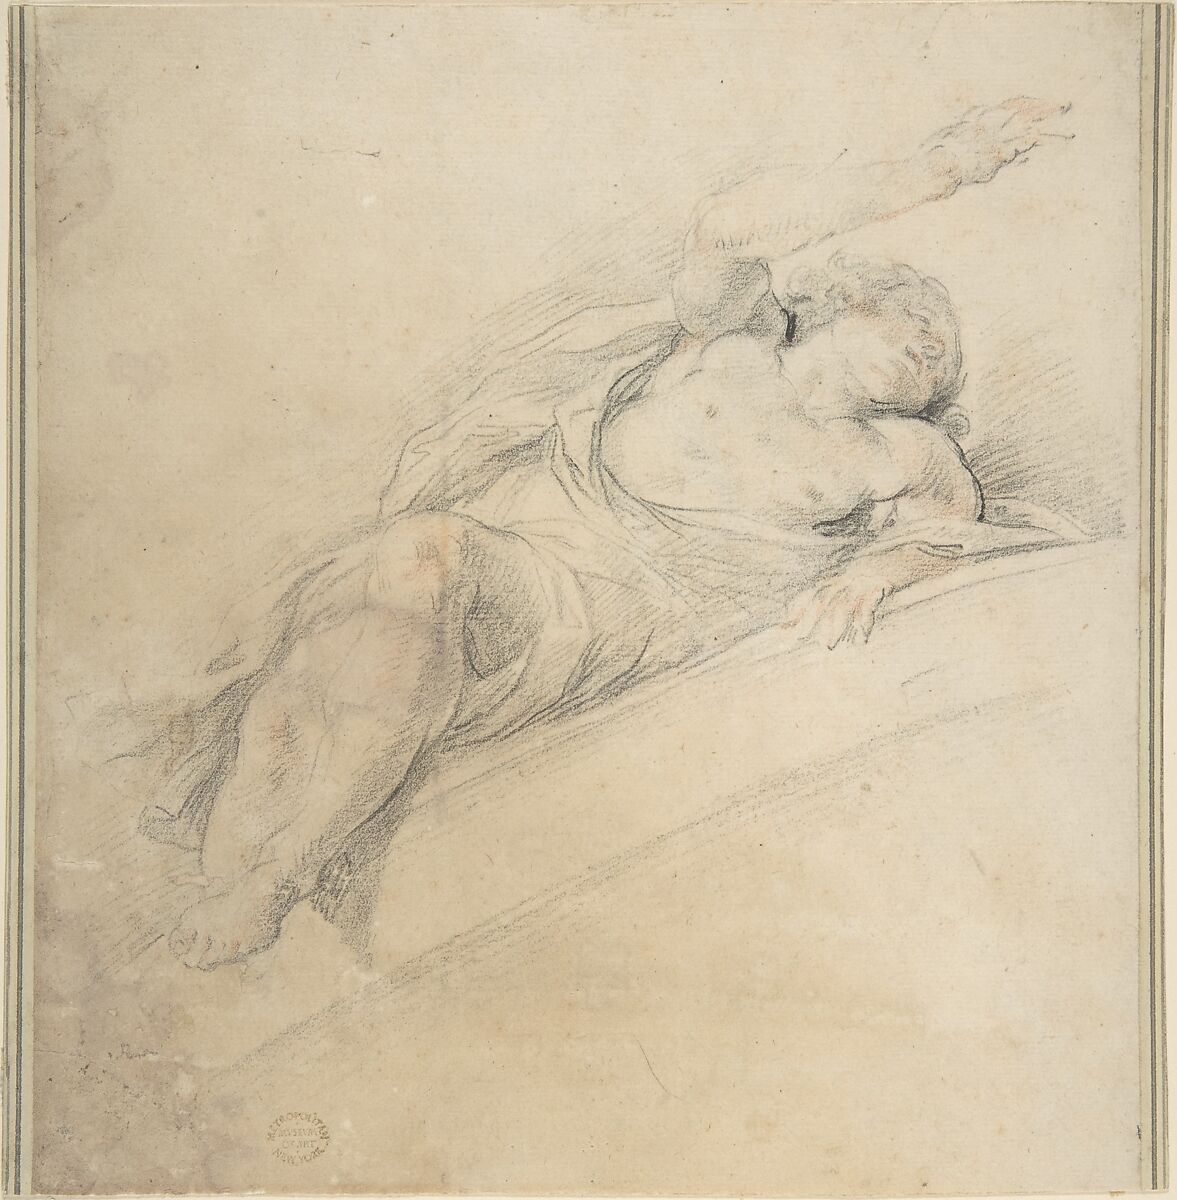 Reclining Figure, Anonymous, Italian, Roman-Bolognese, 17th century, Black and red chalk on cream paper 